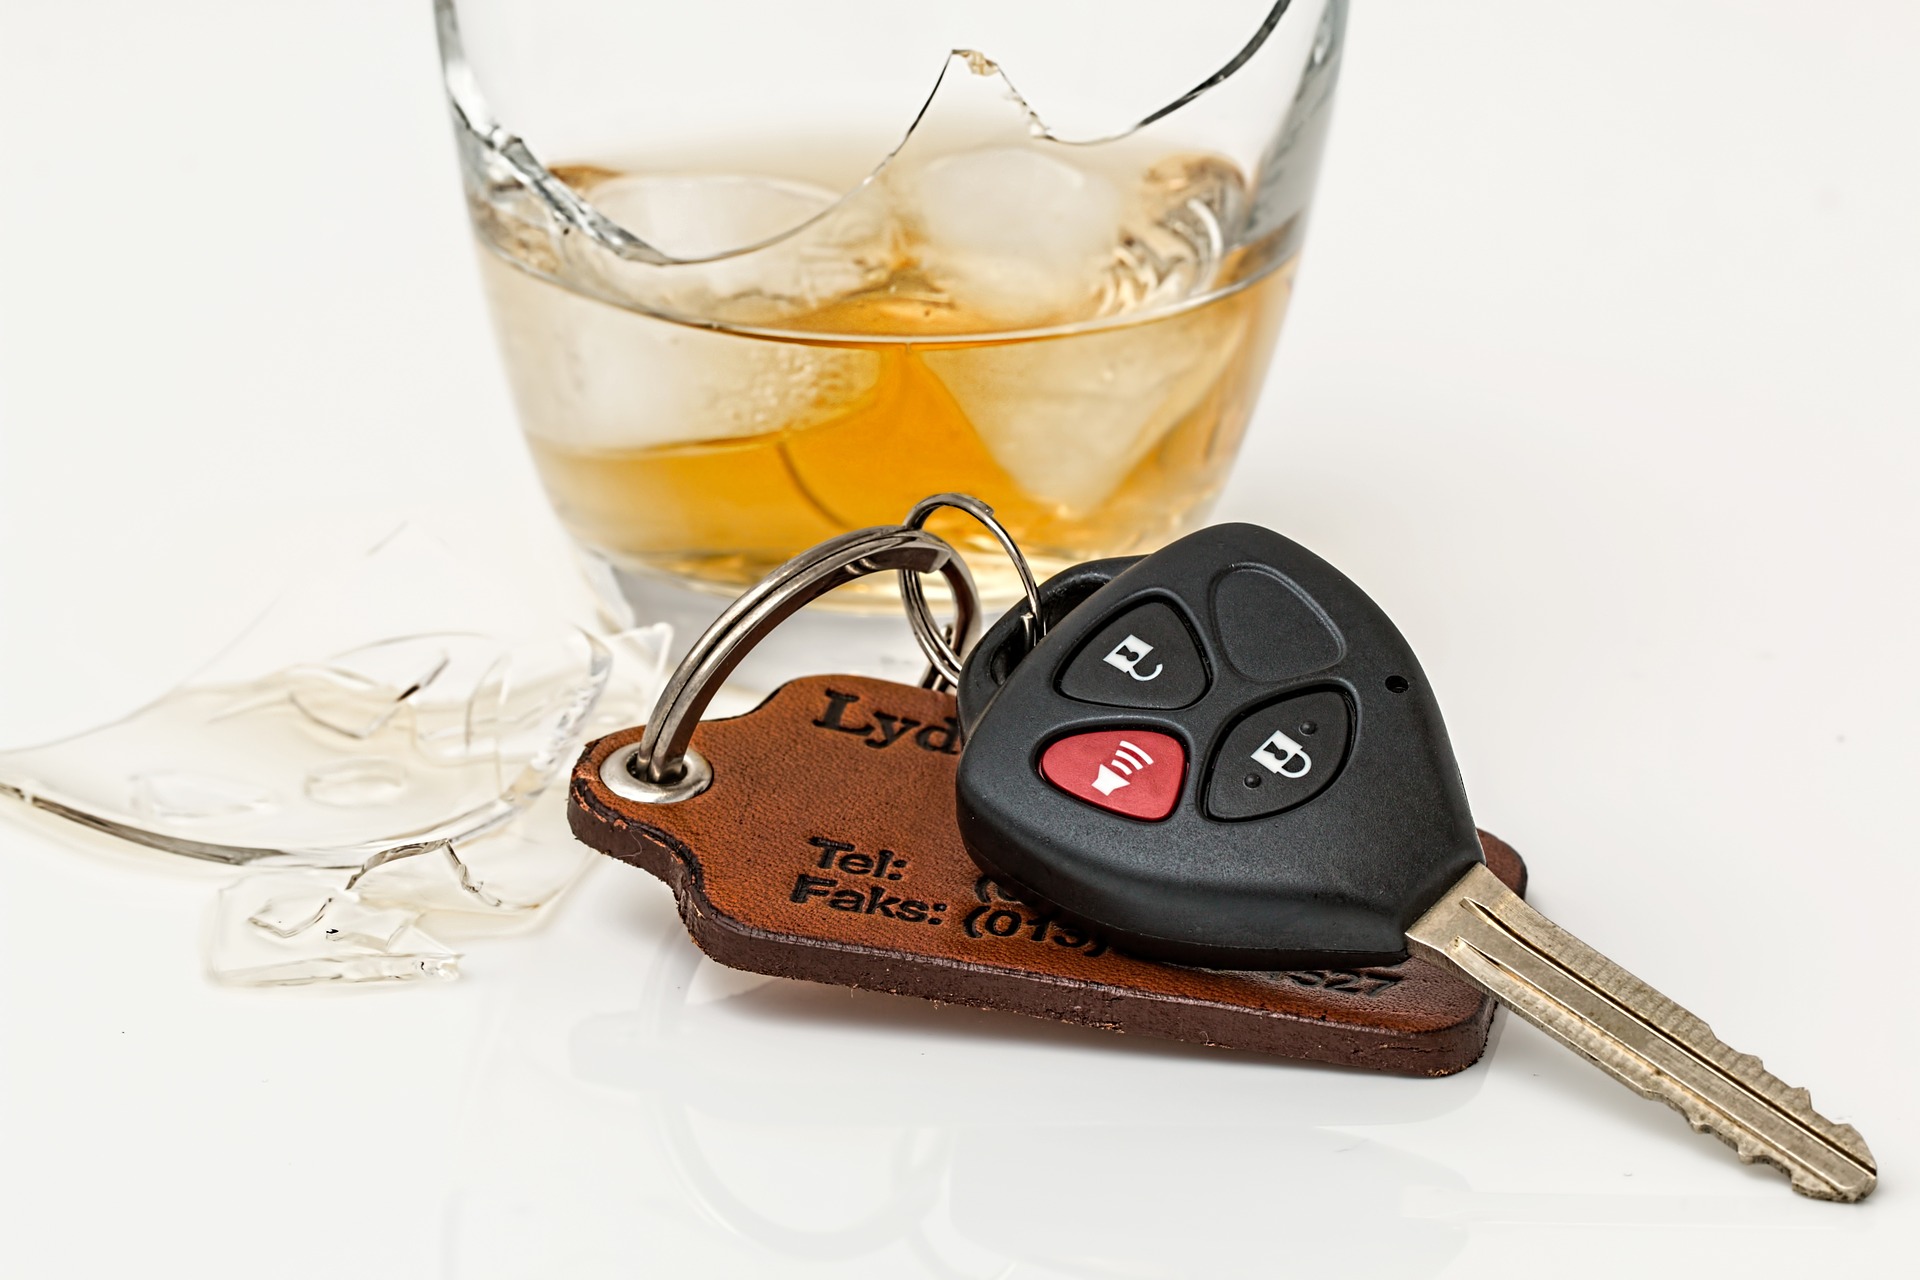 drink-driving-g52886e403_1920